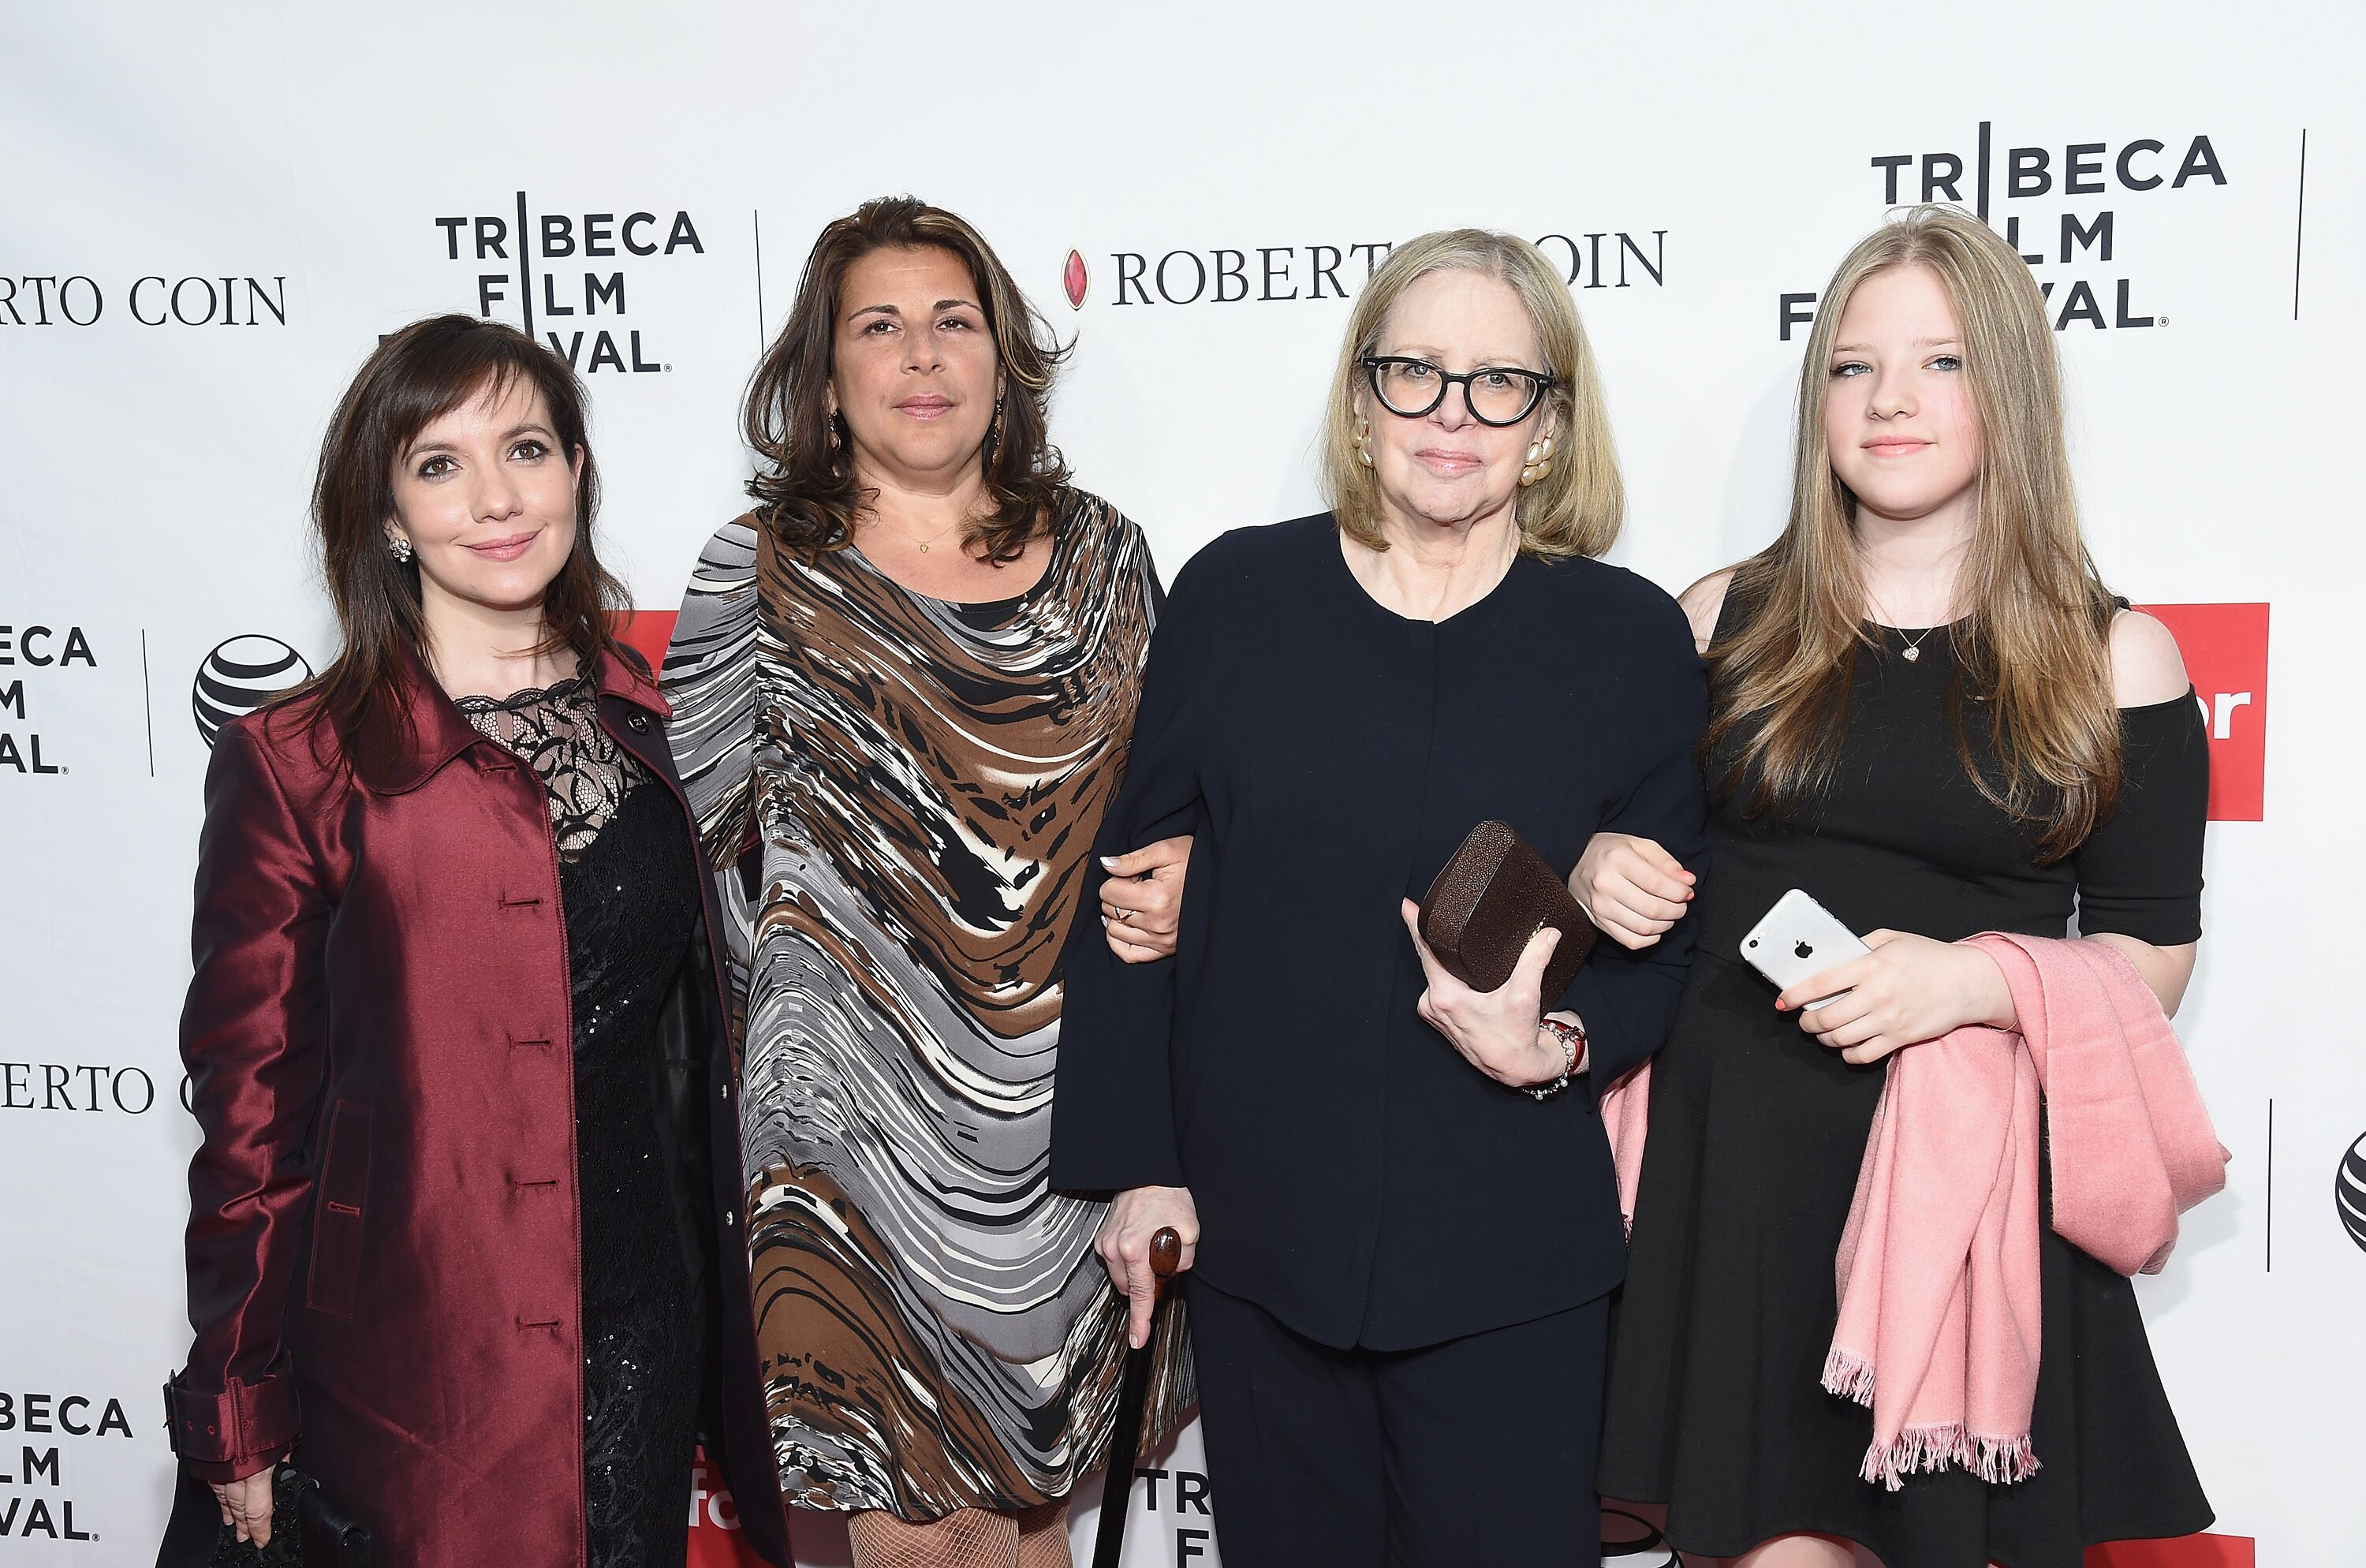 Domenica Cameron-Scorsese, Cathy Scorsese, Helen Morris and Francesca Scorsese attend the closing night screening of 'Goodfellas' during the 2015 Tribeca Film Festival at Beacon Theatre. | Source: Getty Images